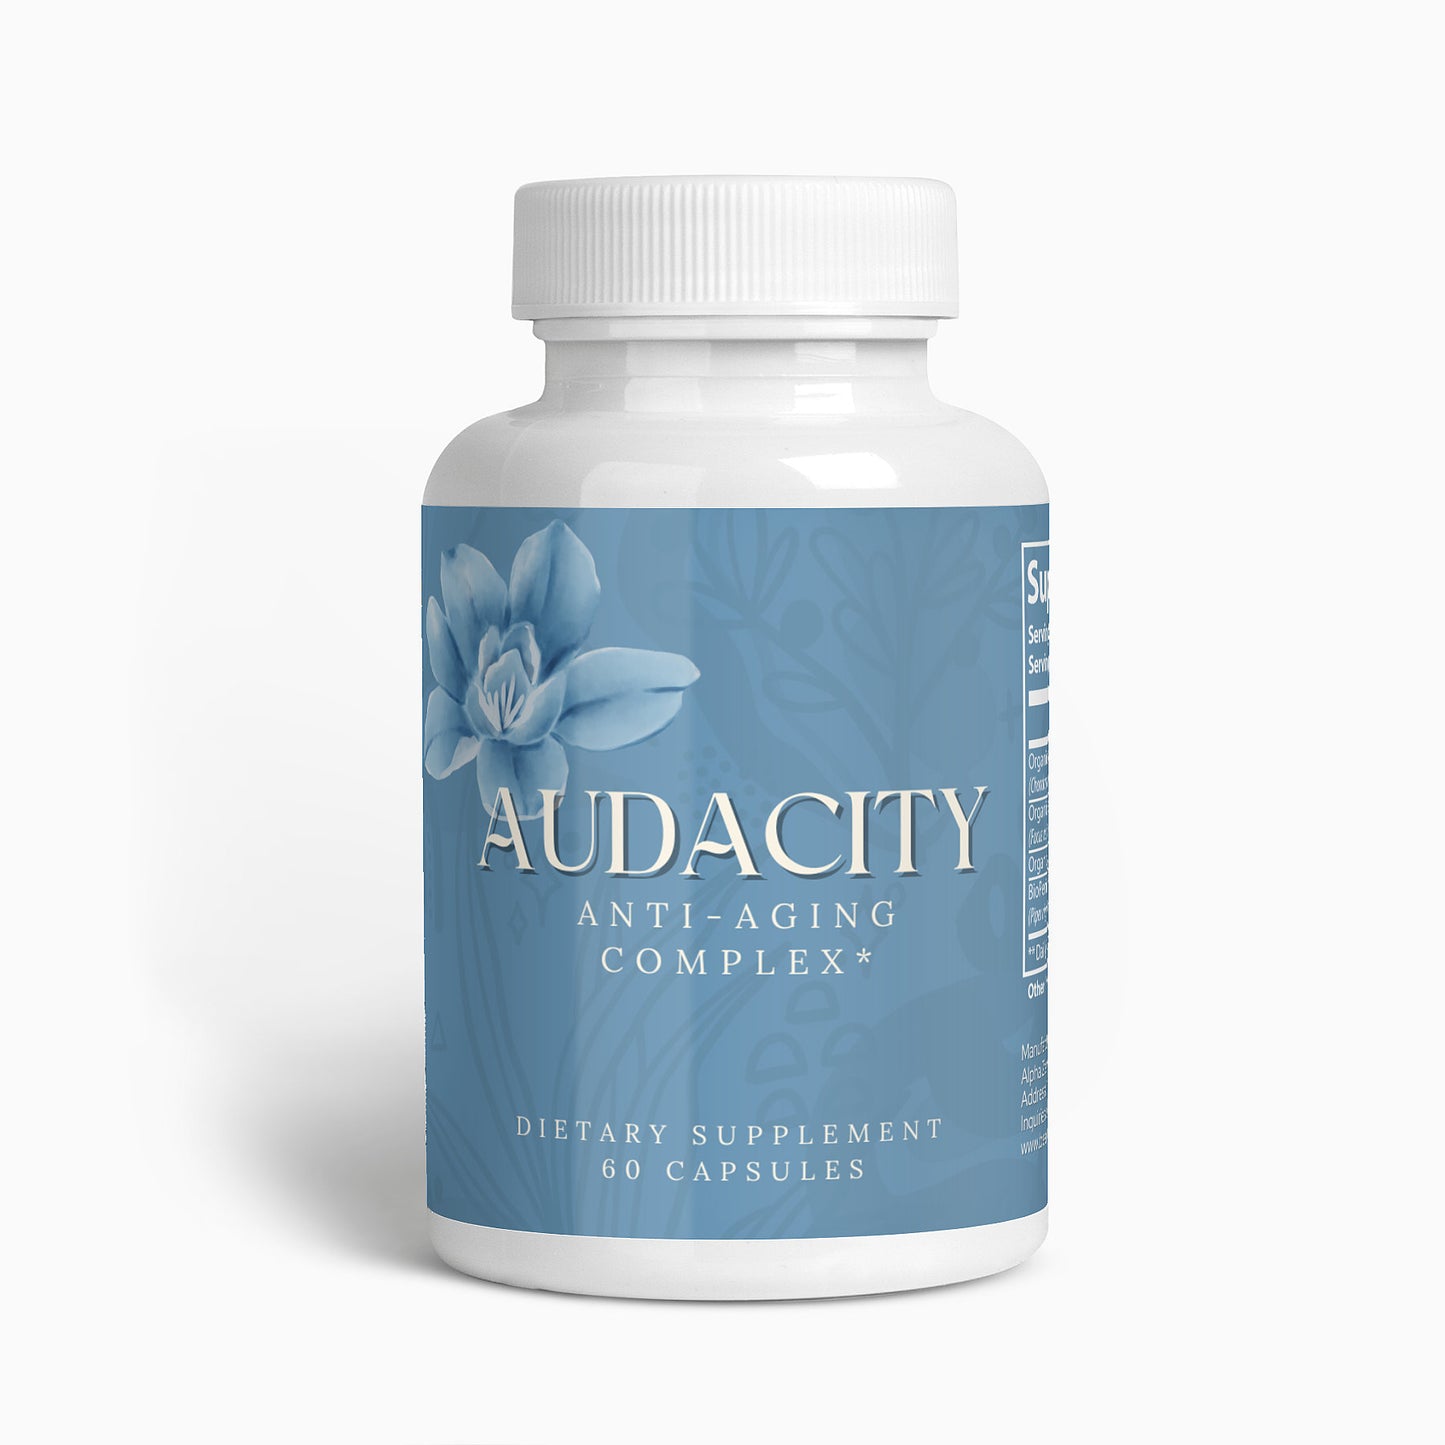 Audacity: Bioavailable Anti-Aging Complex with Sea Moss, Bladderwrack, and Burdock